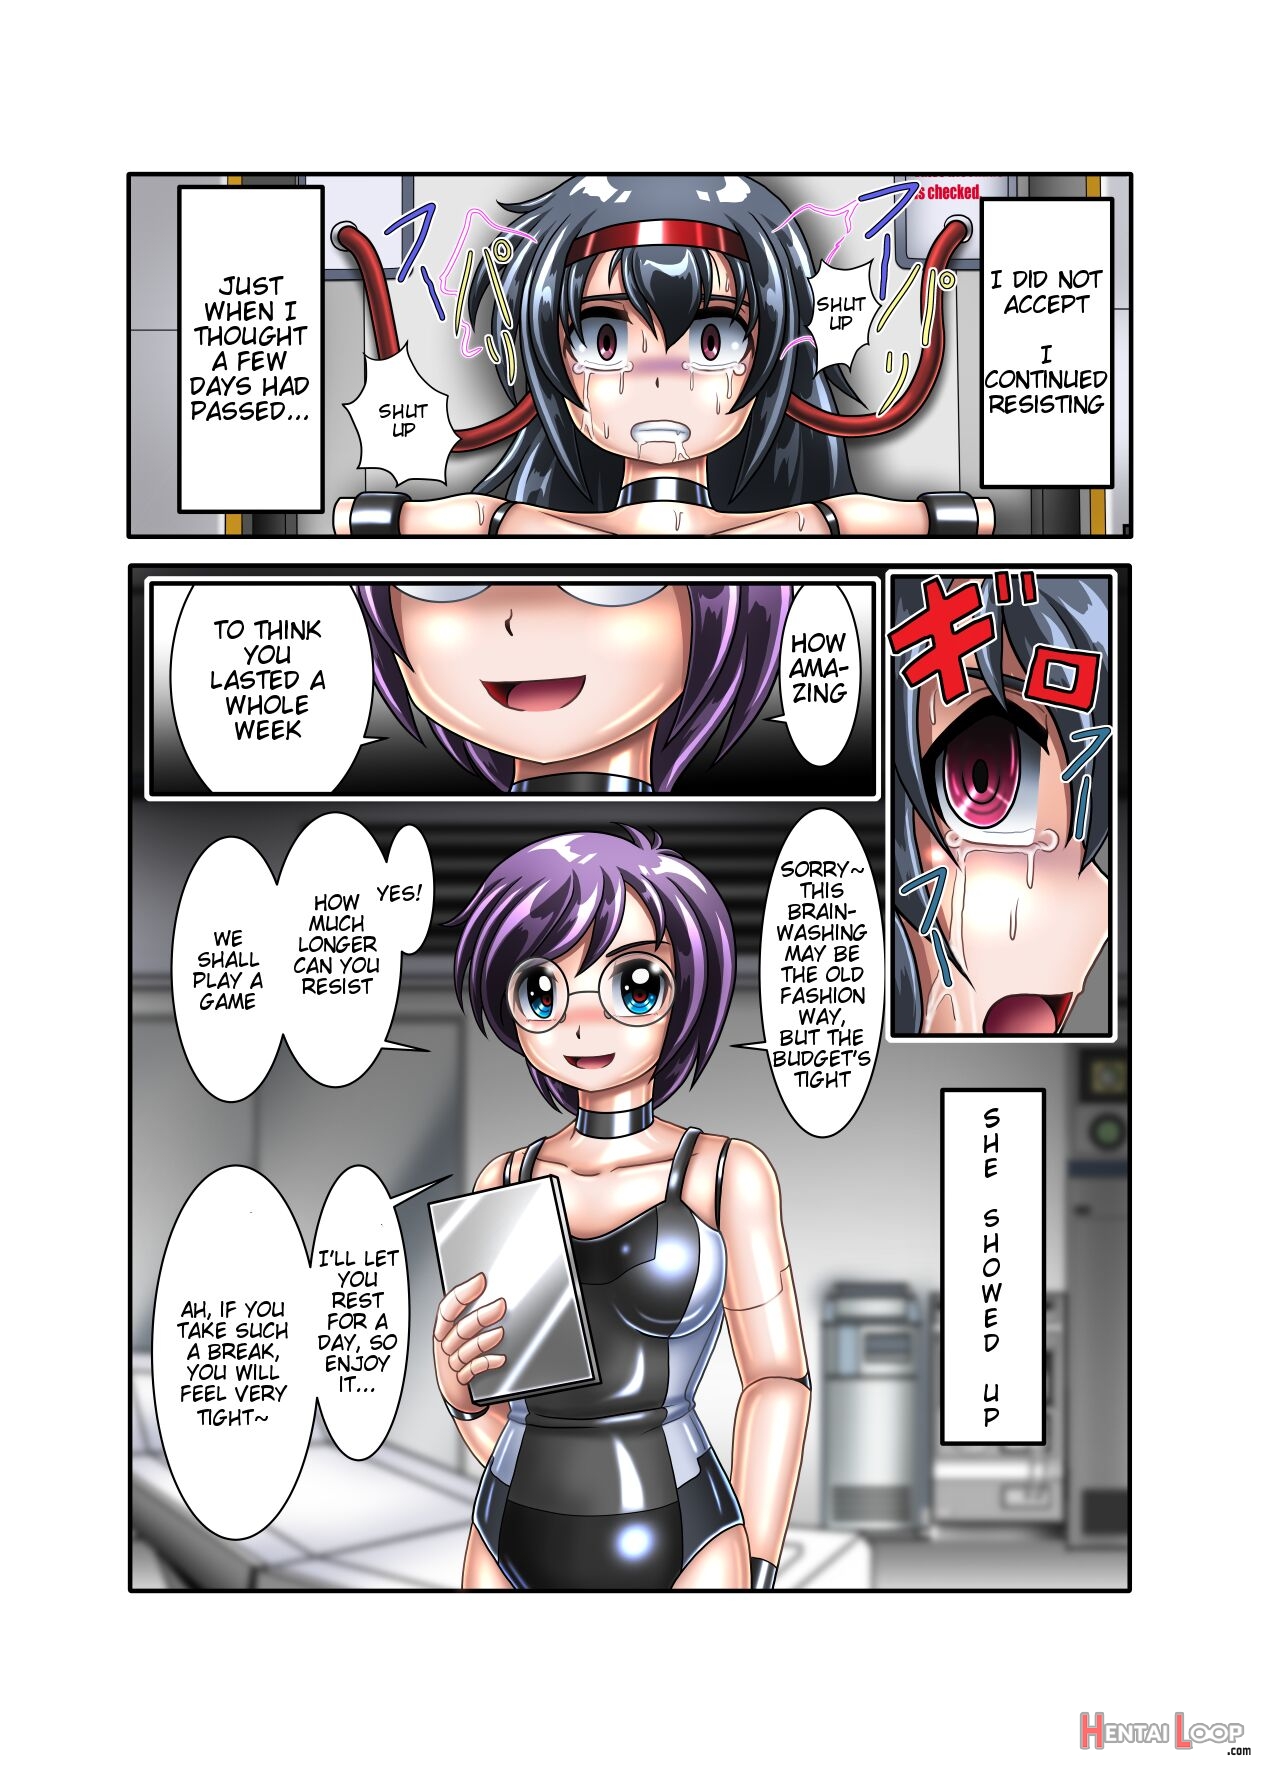 Hatsumi's 3 Long Weeks page 9